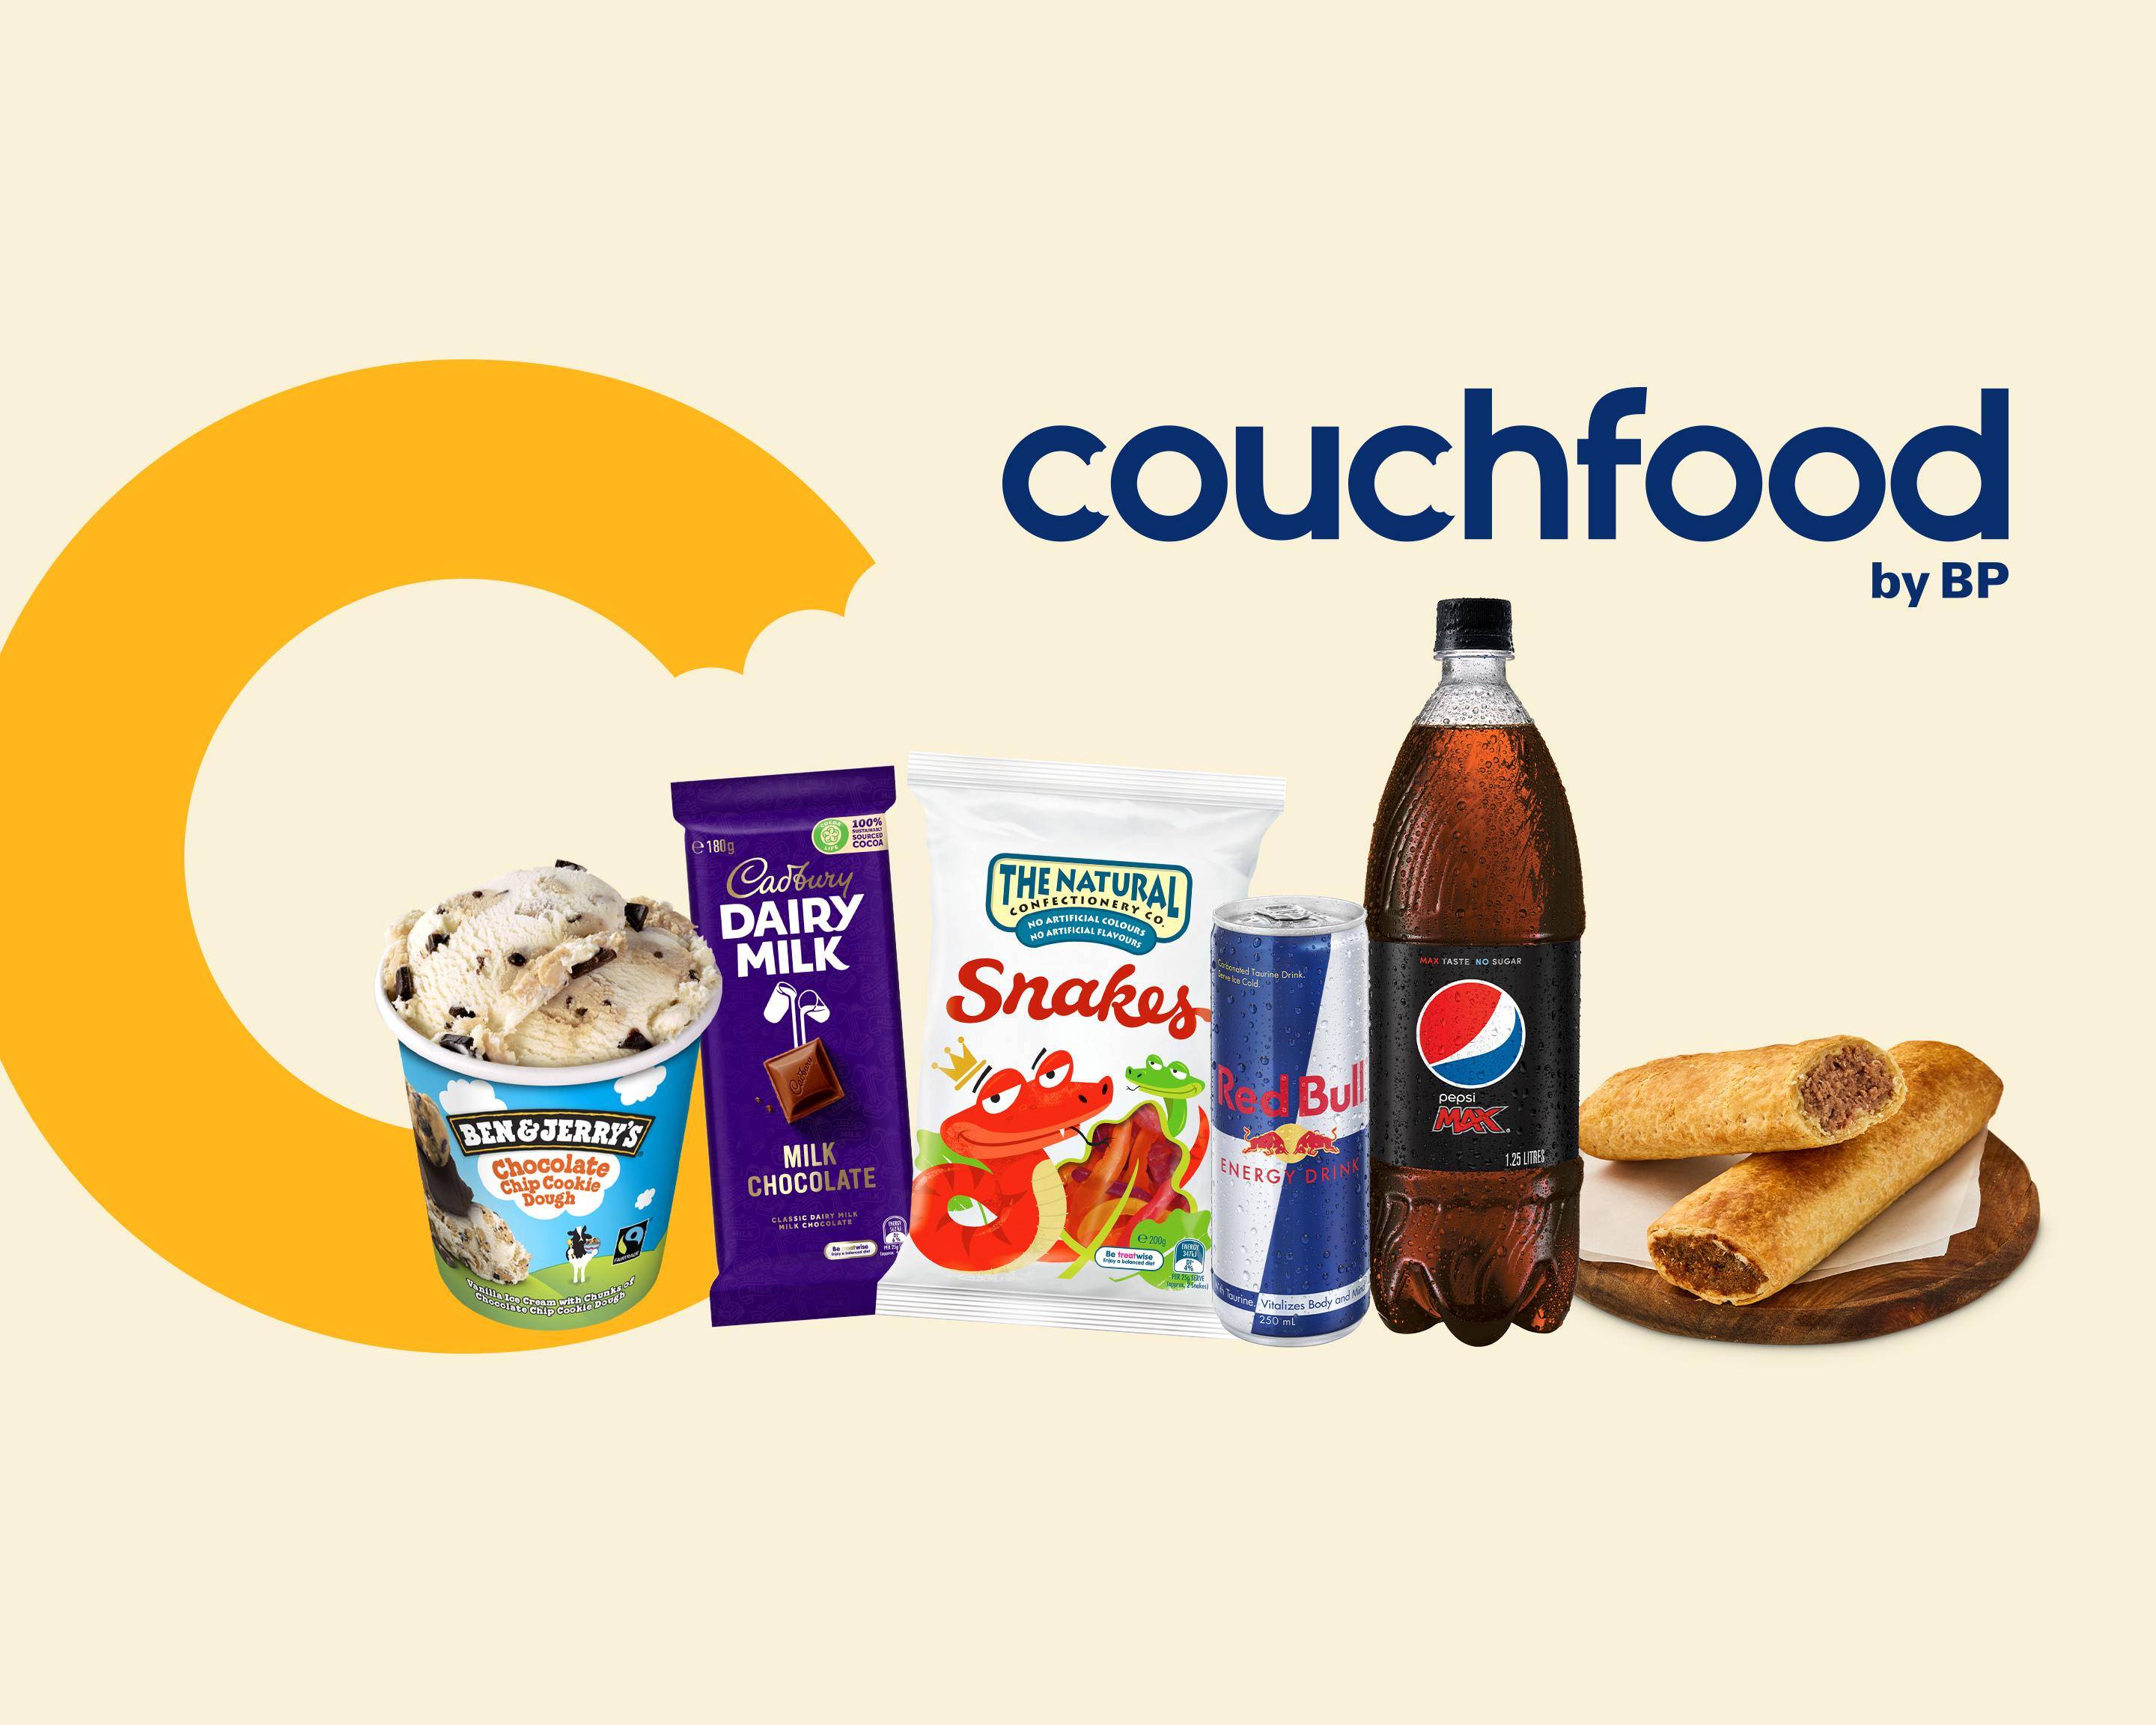 Couchfood (BP Underwood South)